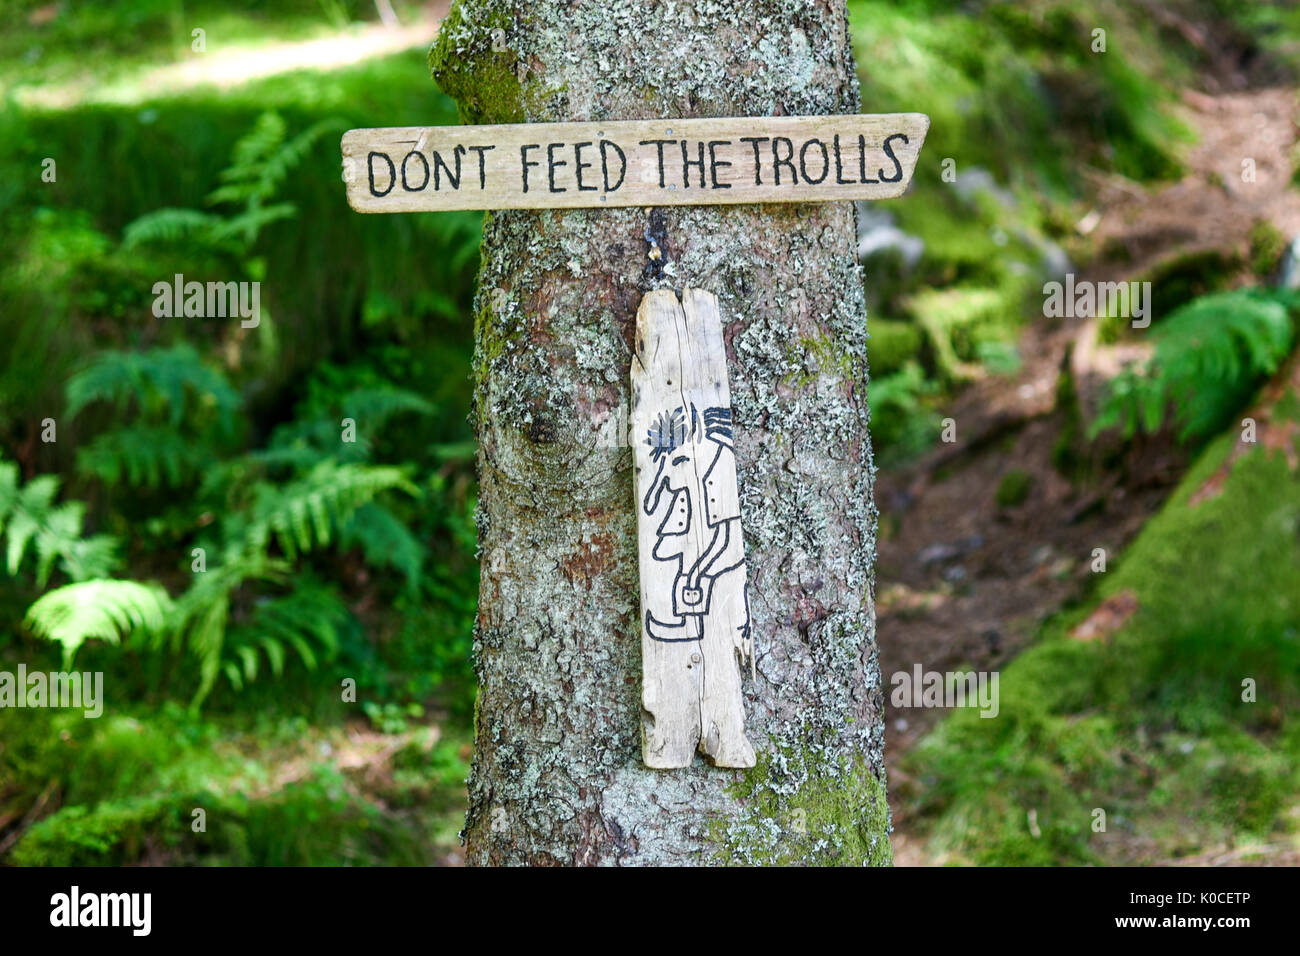 The plate: Don't feed the trolls in forest in Norway. Stock Photo